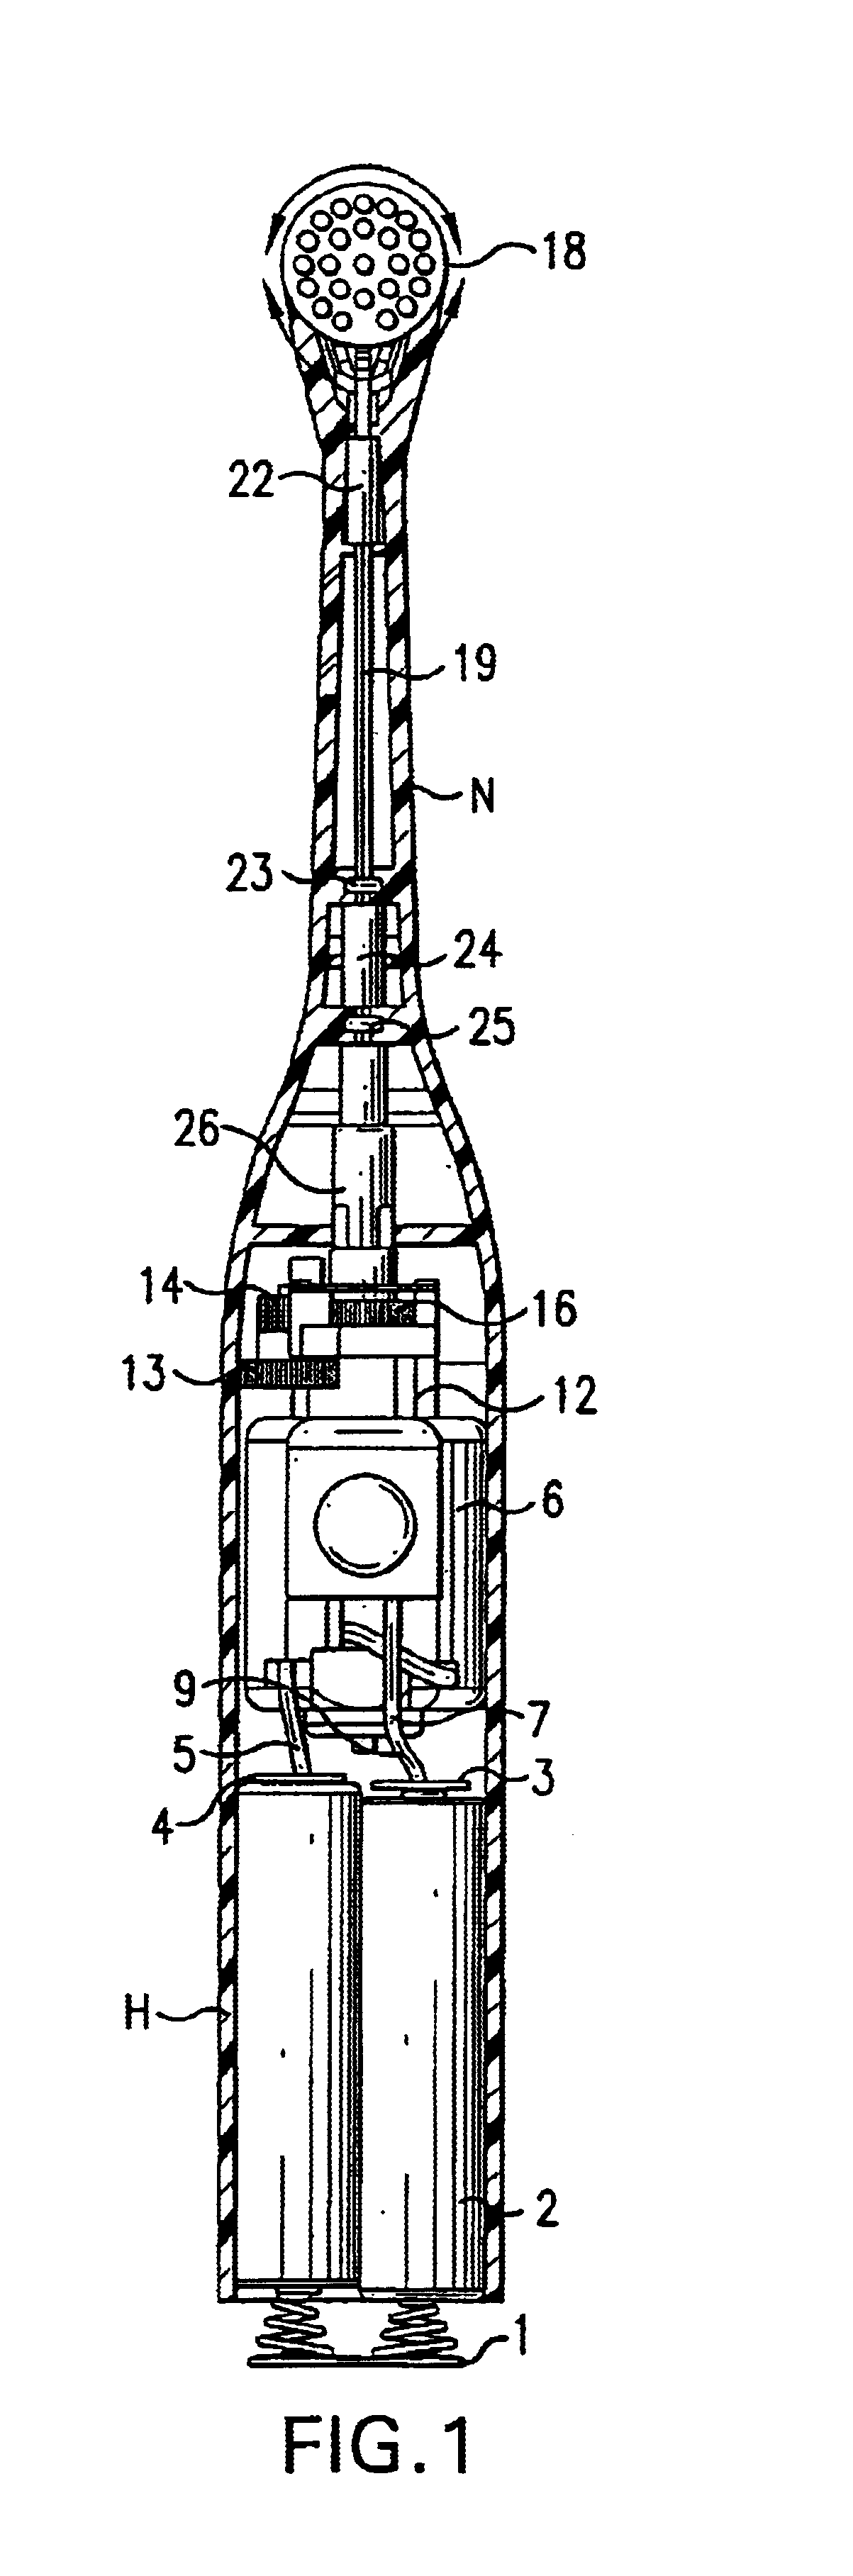 Electric toothbrush reduction gearbox